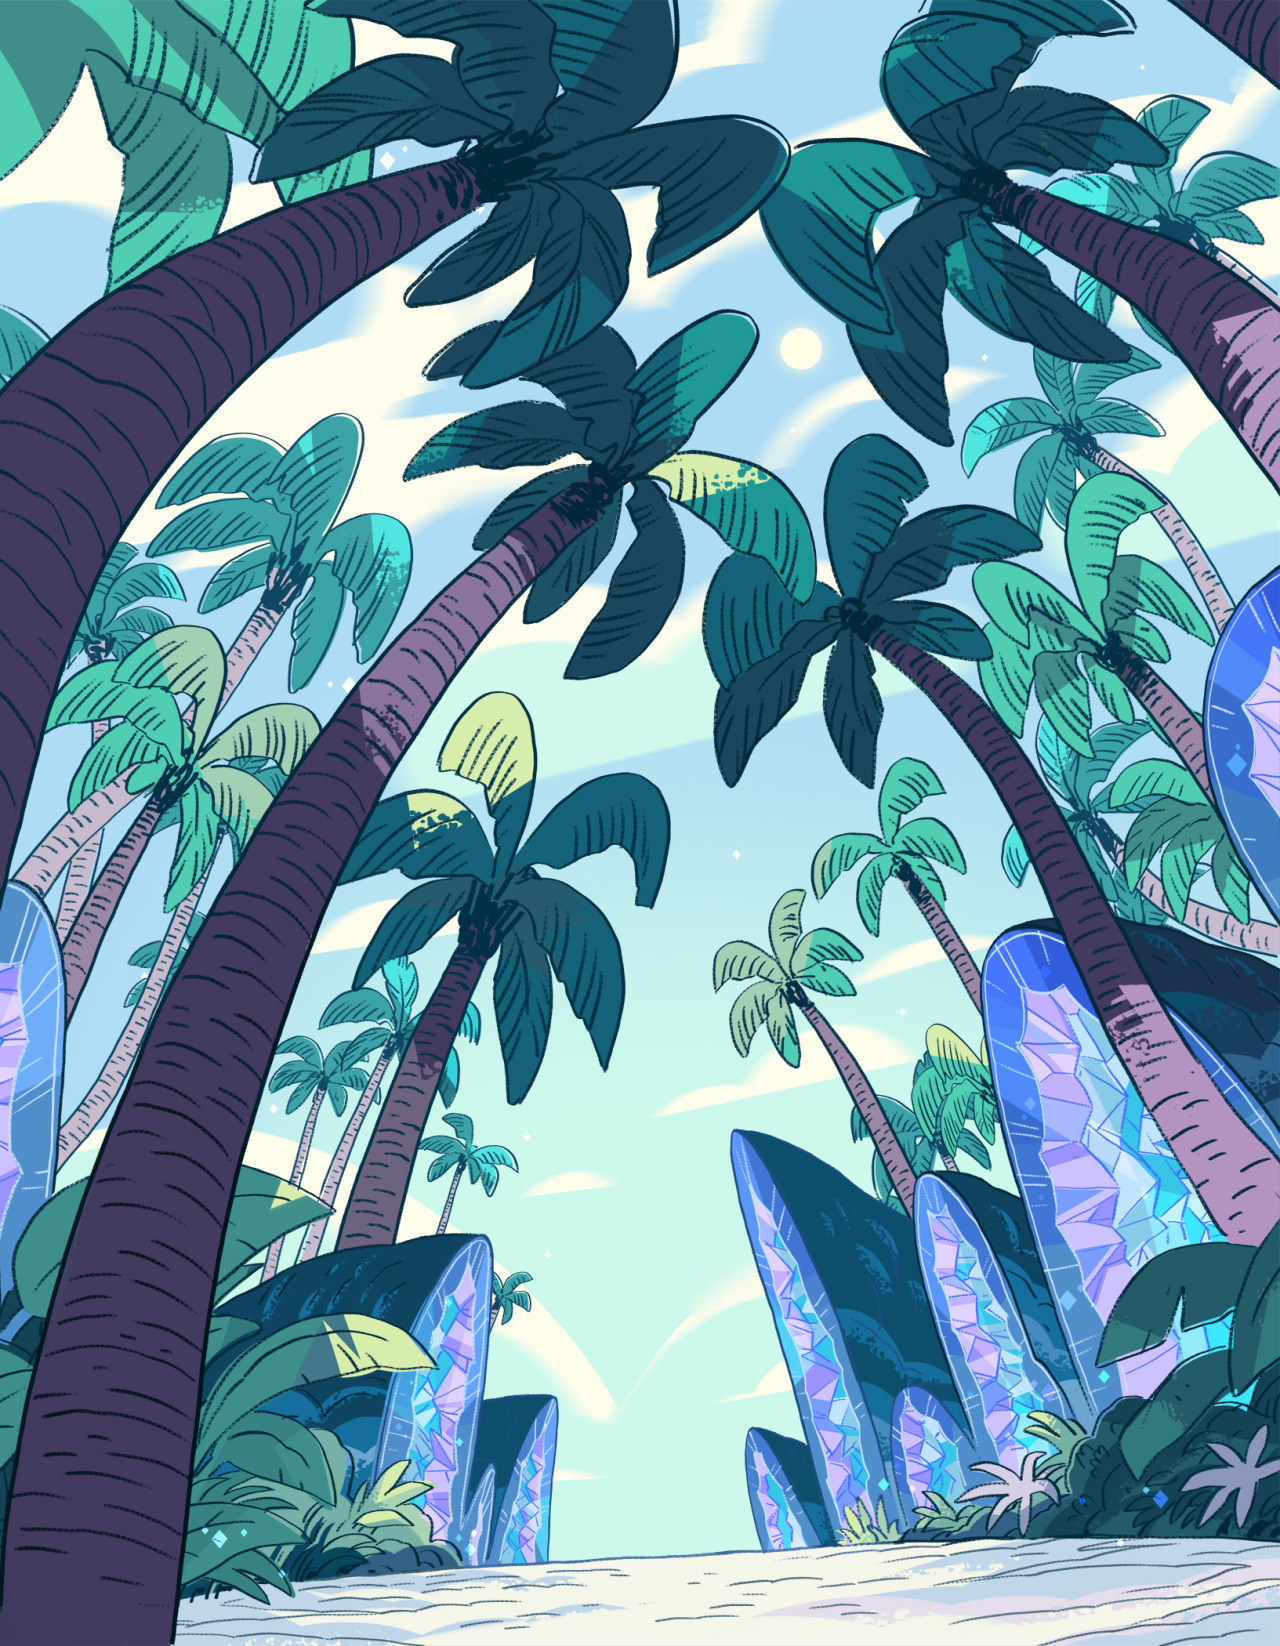 A selection of Backgrounds from the Steven Universe episode: Island Adventure Art